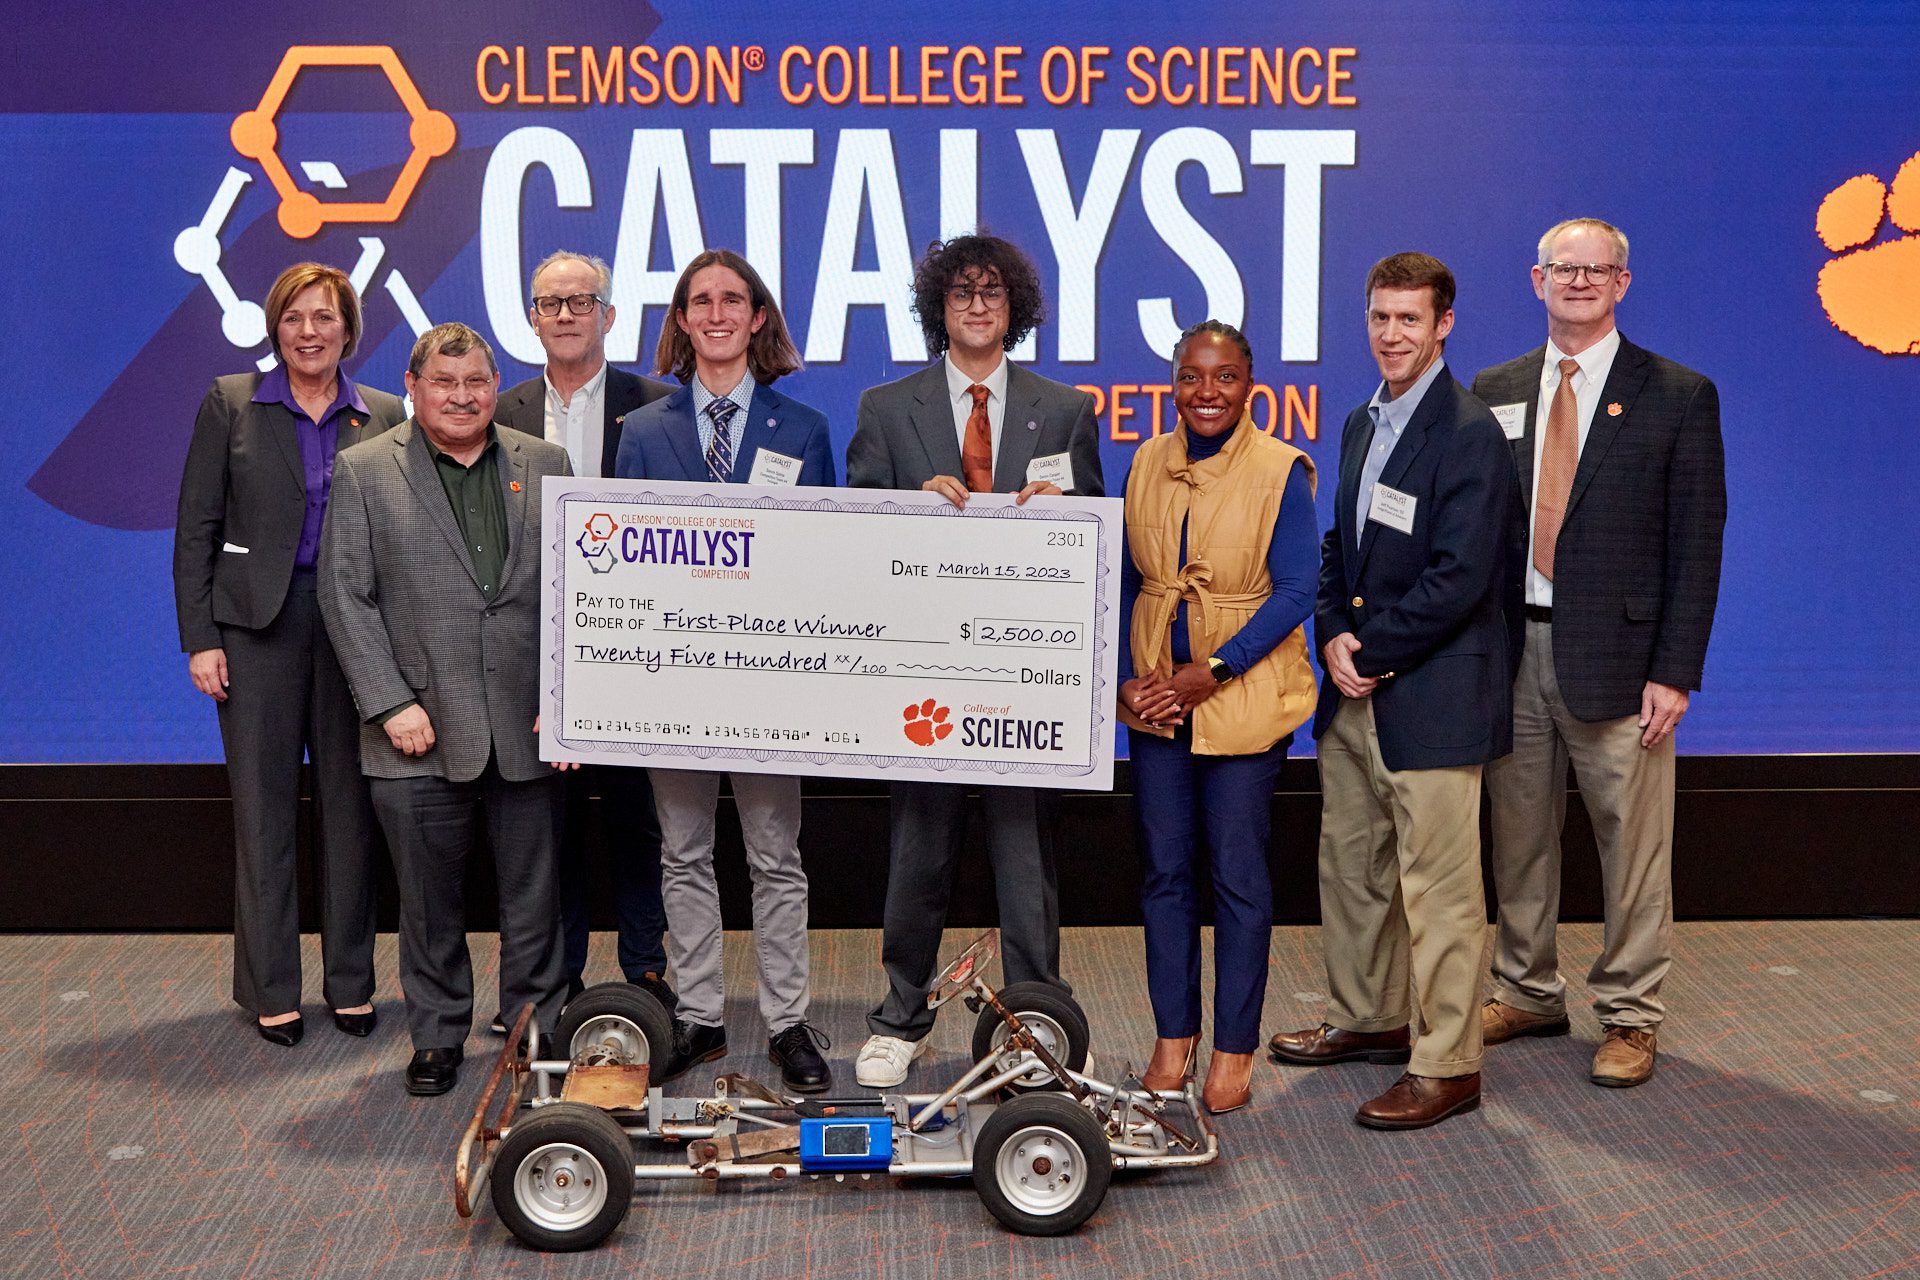 Seven people pose in front of a sign for Clemson College of Science Catalyst Competition. They are holding a big check and standing in front of a go-cart frame.